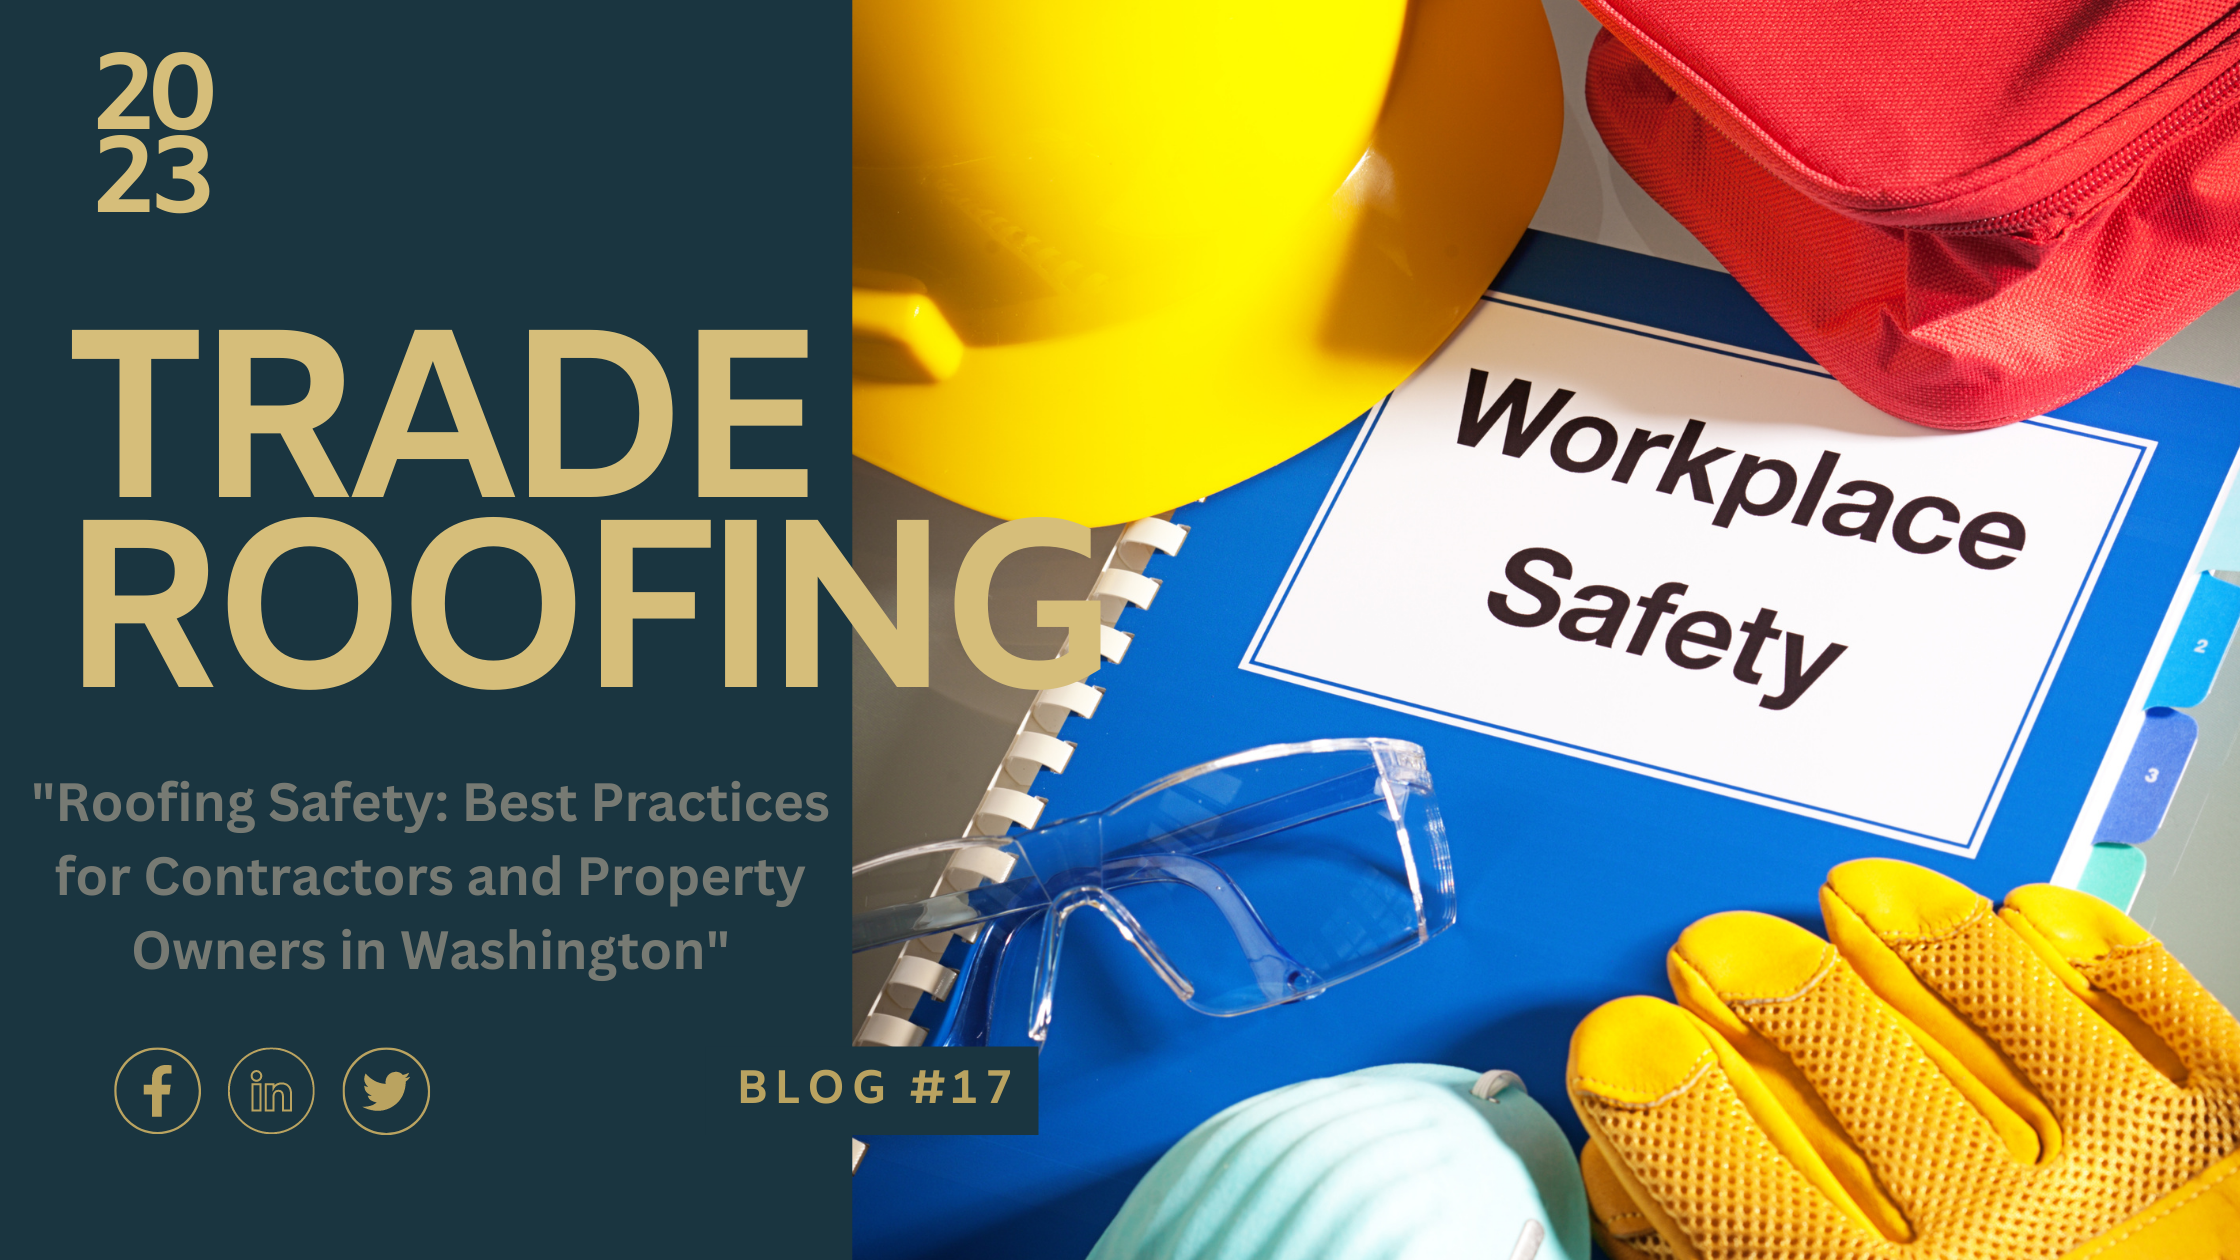 Roofing Safety Best Practices for Contractors and Property Owners in Washington